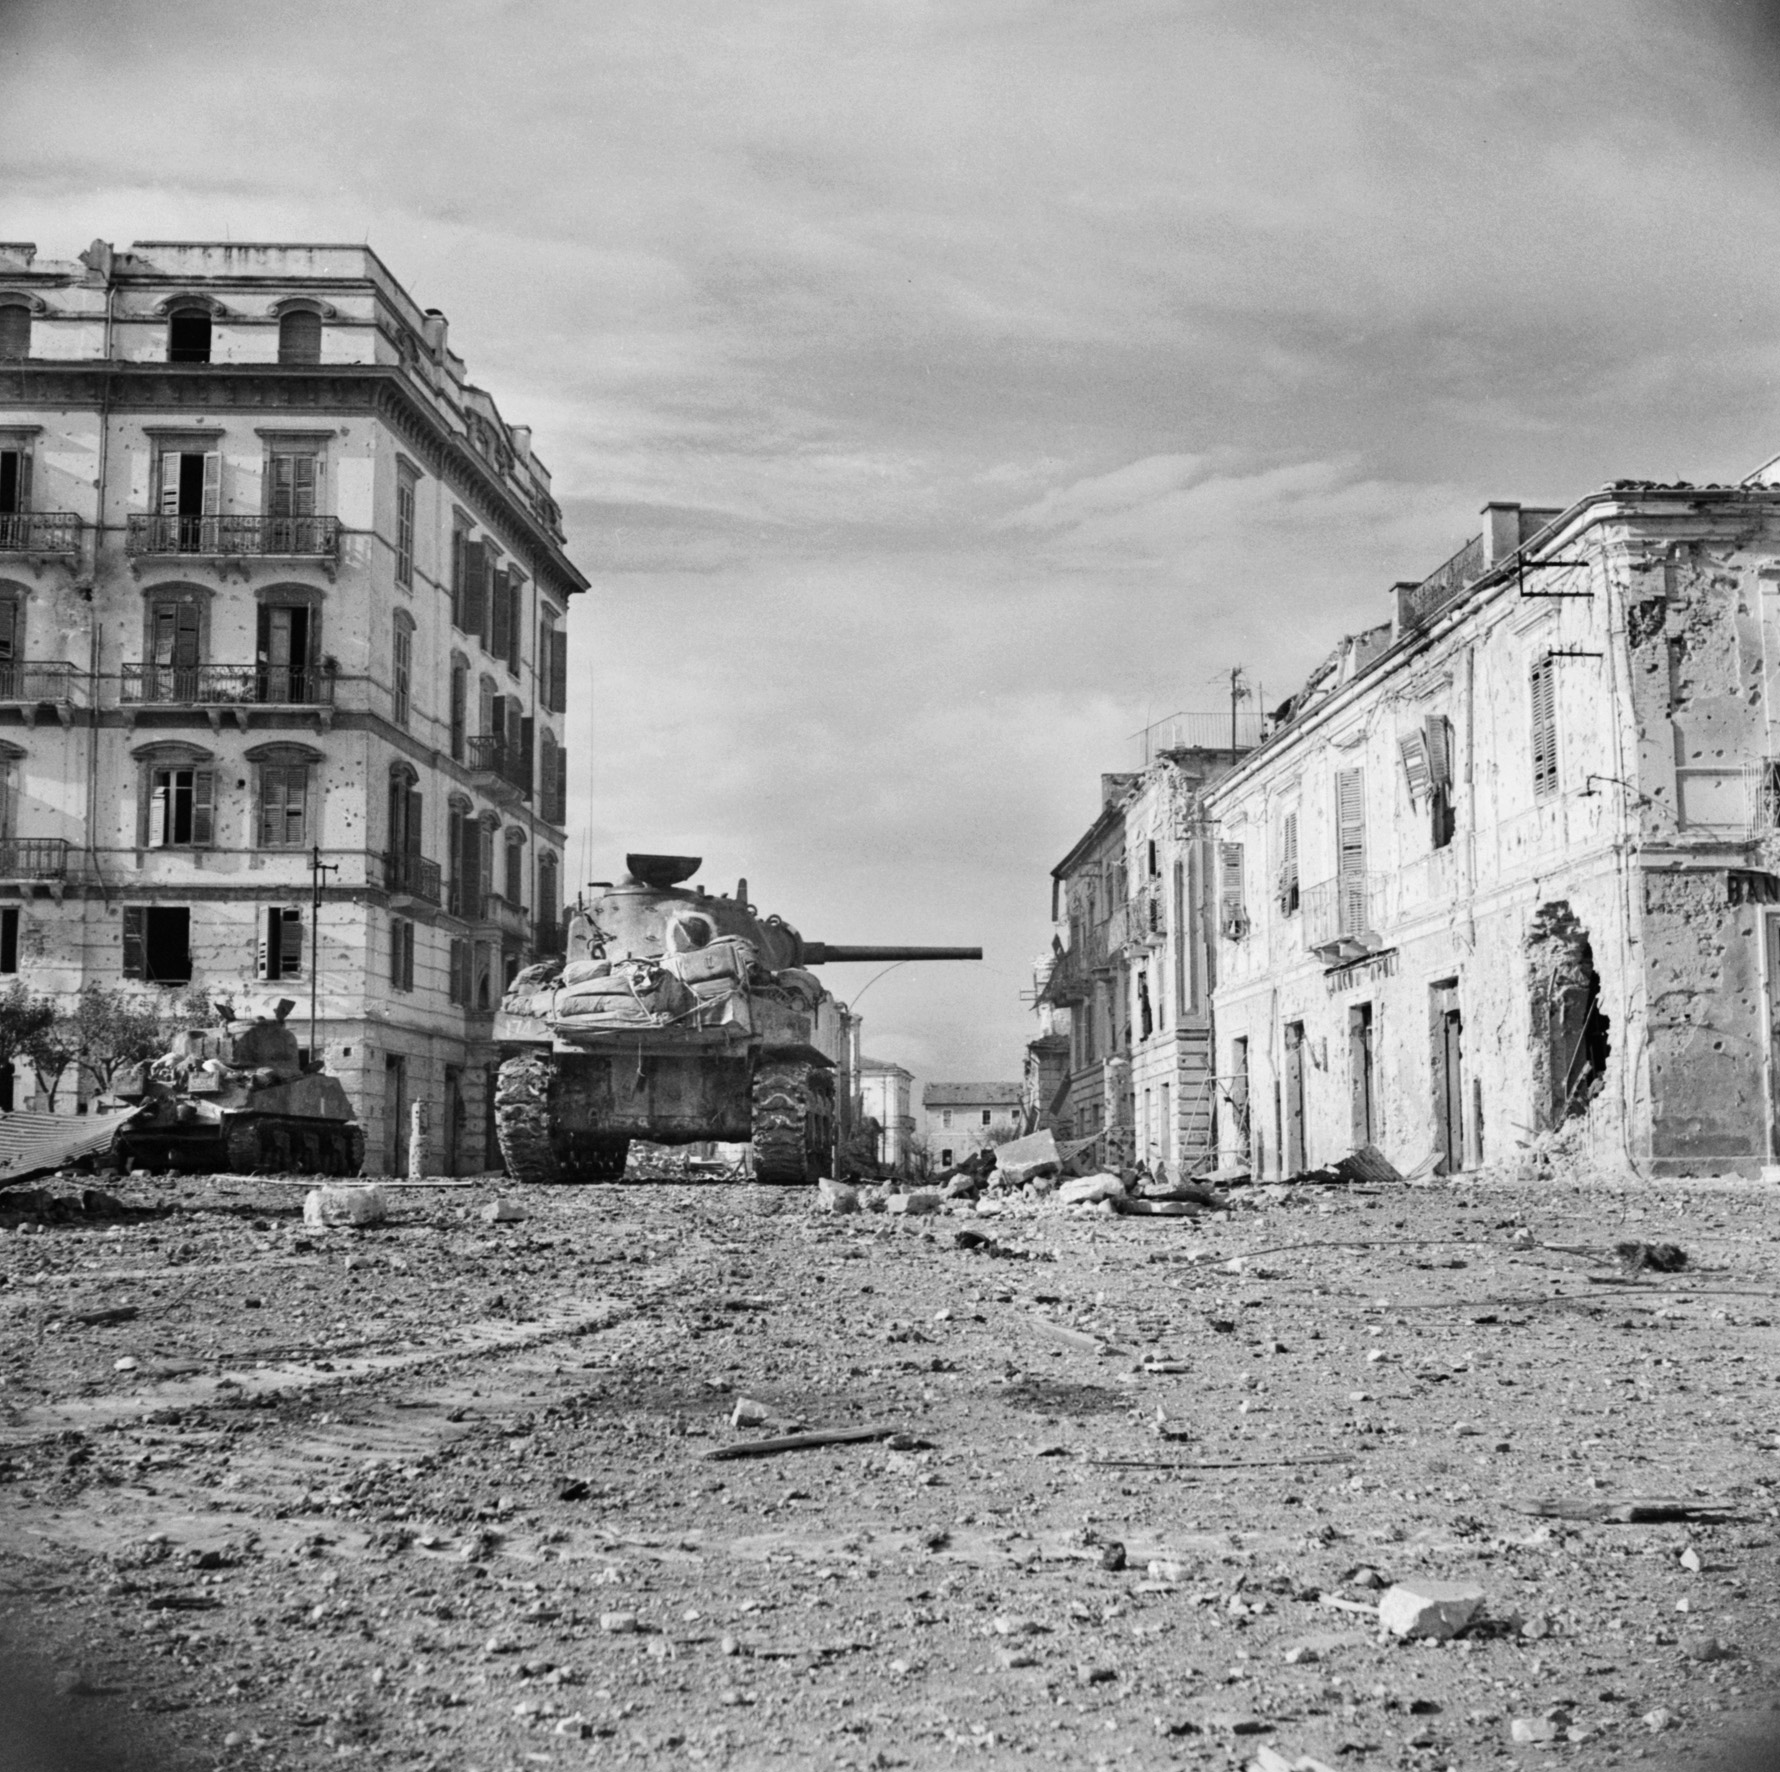 A pair of tanks from the Canadian Three Rivers Regiment advances into the center of Ortona on December 22, 1943. Armor played a key role supporting infantry of both sides in the hard-fought urban battle. 